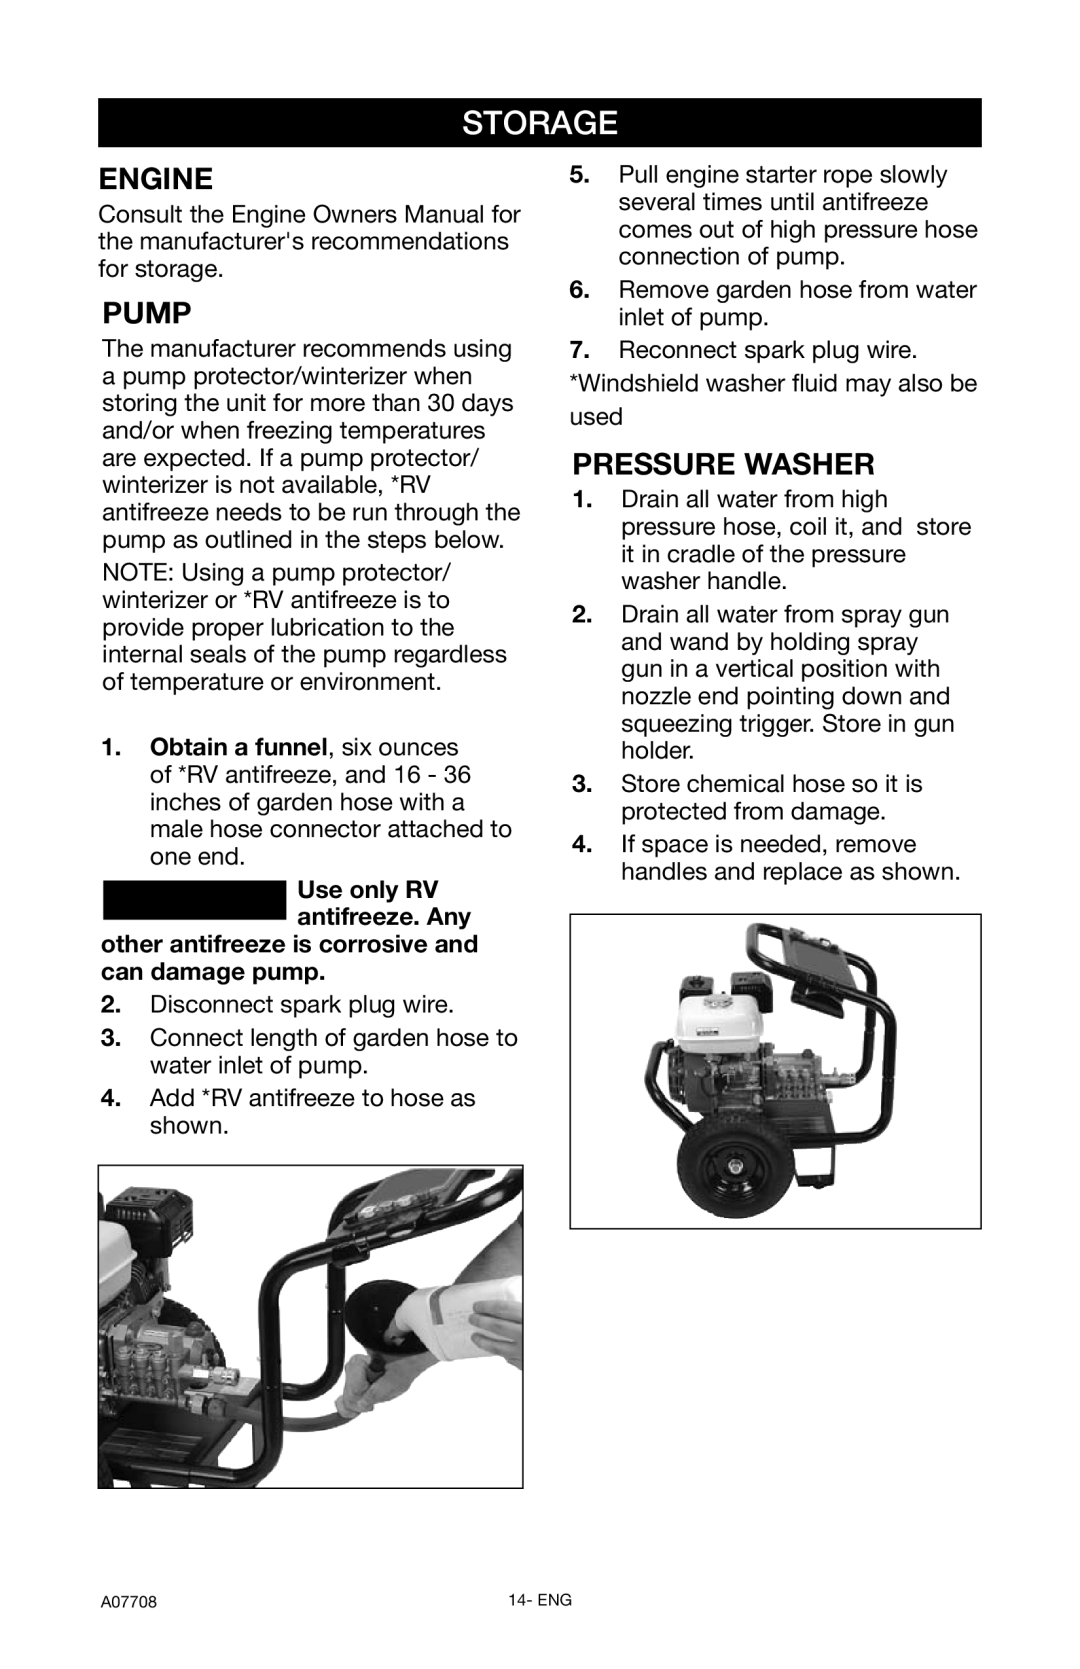 Porter-Cable PCH2800C, A07708-0412-0 instruction manual Storage, Pressure Washer, Engine, Pump 